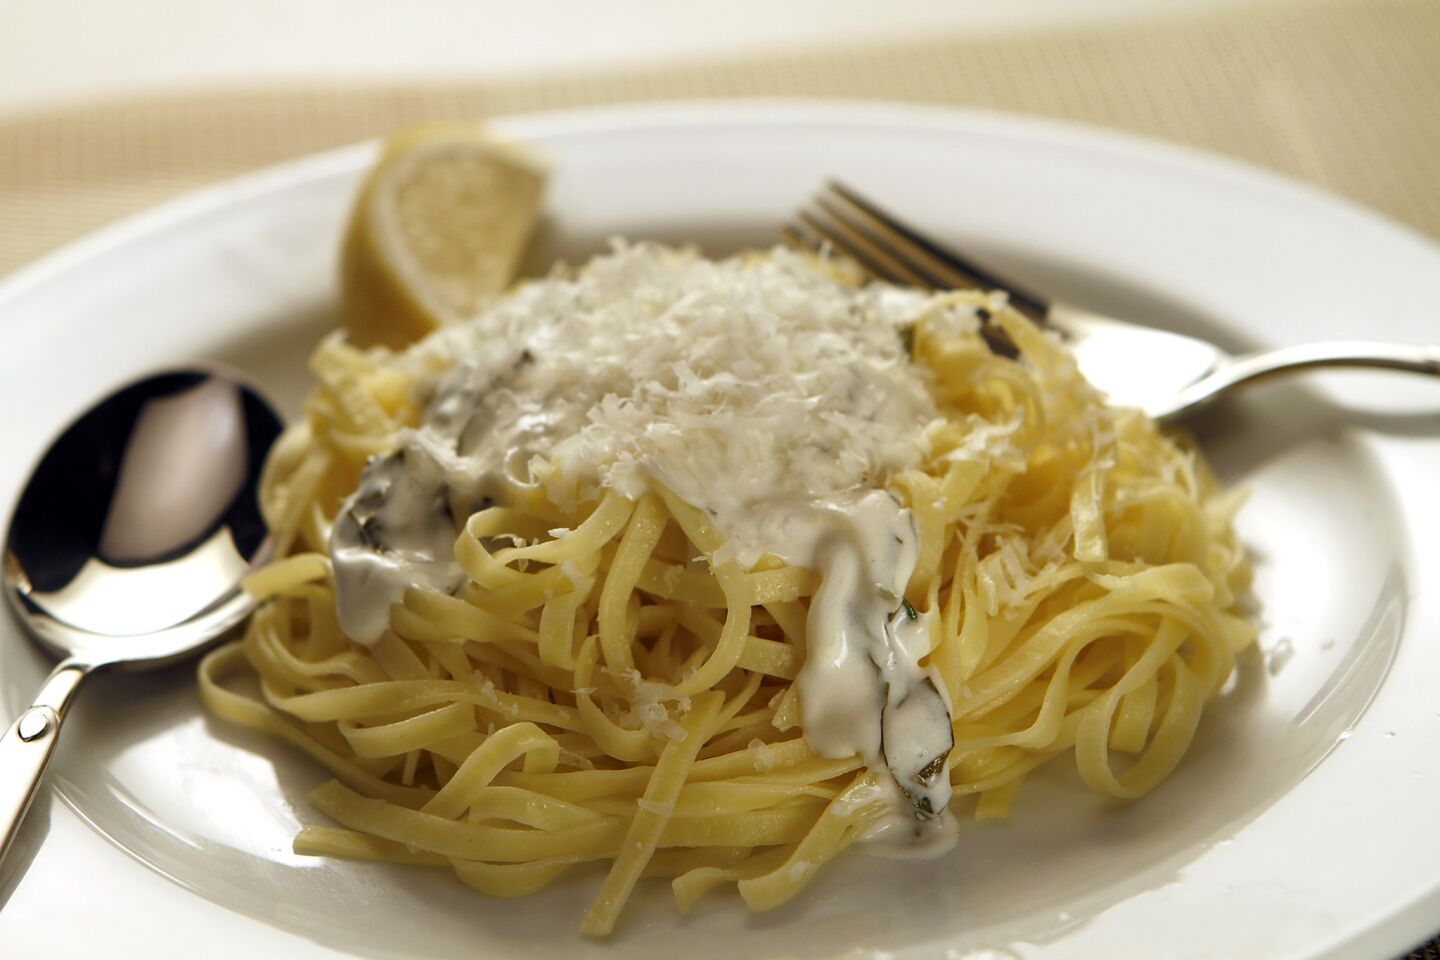 Pasta, butter, lemon, basil, cream, Parmigiano and freshly ground black pepper. Could dinner possibly get any easier?